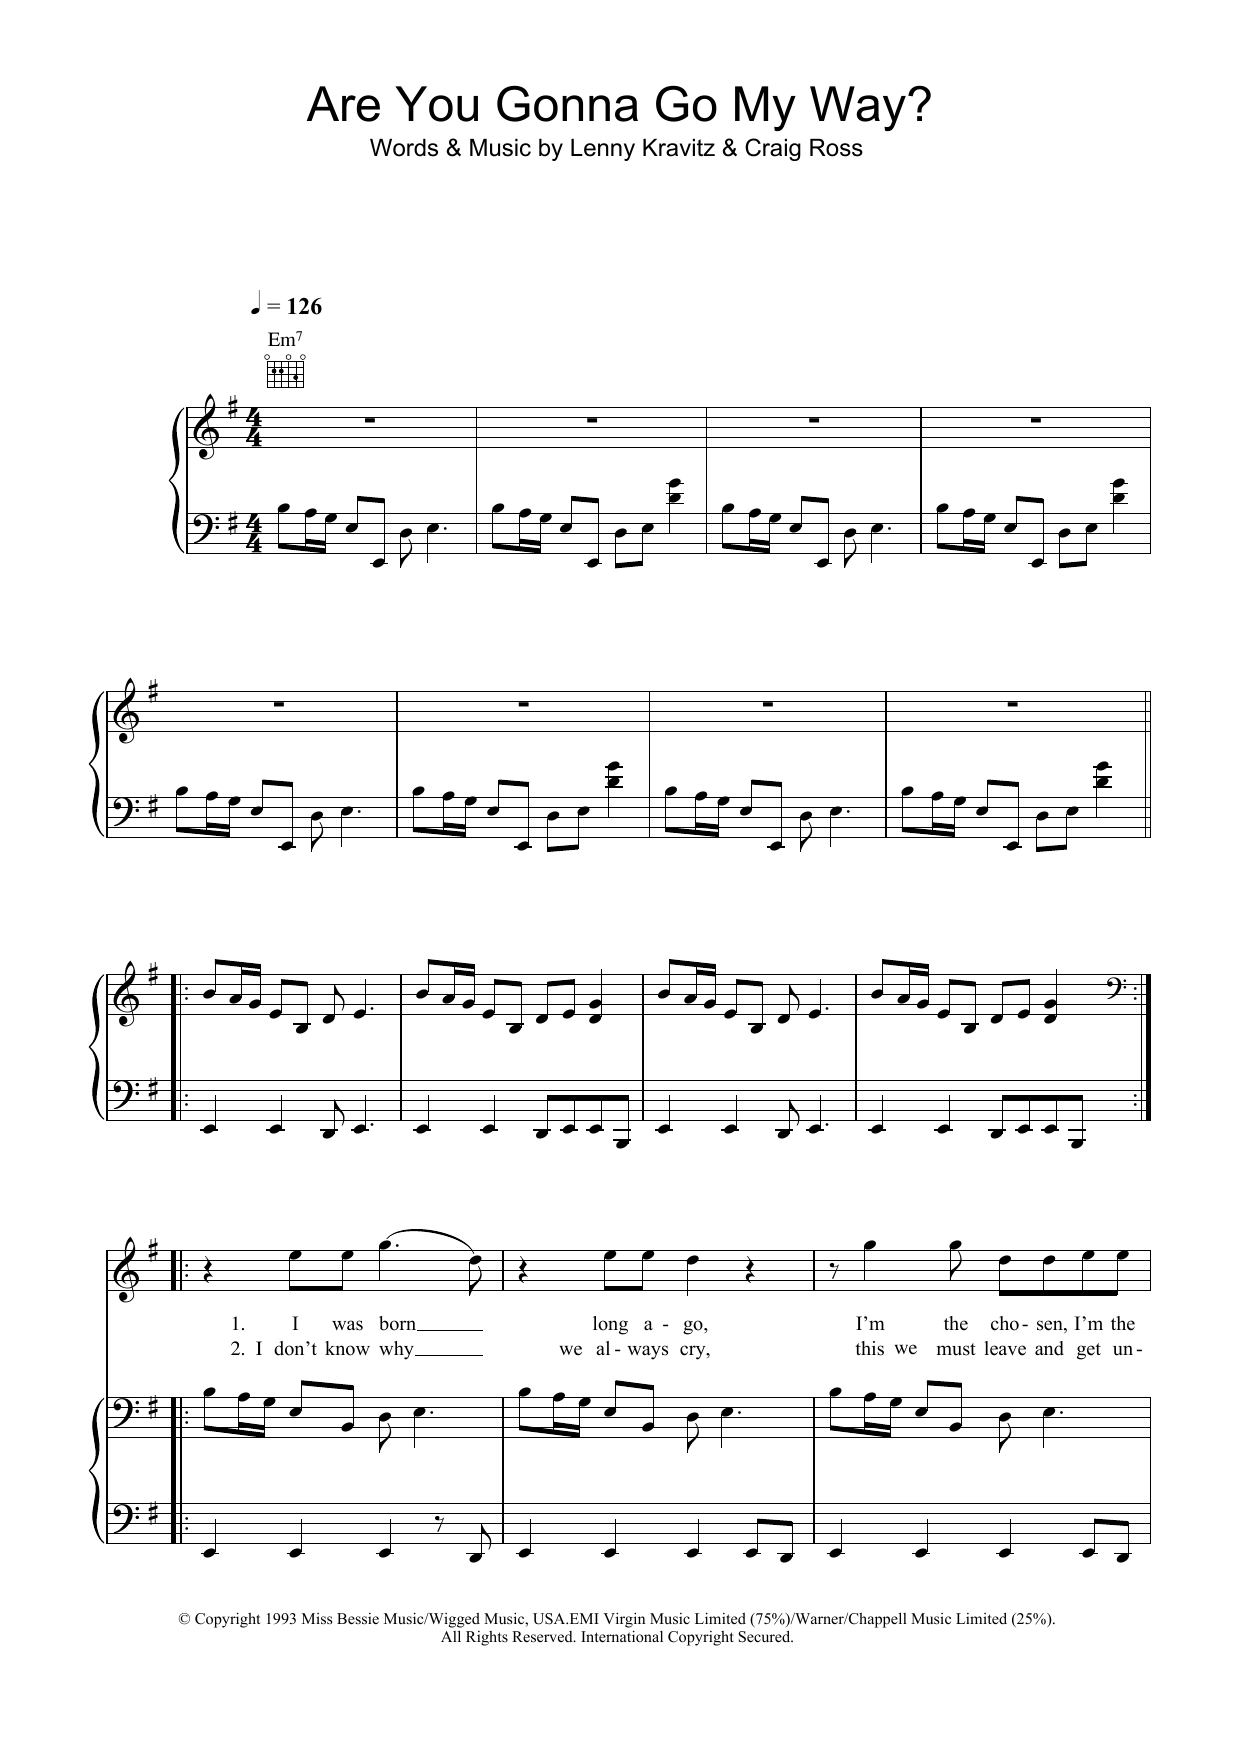 Lenny Kravitz Are You Gonna Go My Way? sheet music preview music notes and score for Piano, Vocal & Guitar including 6 page(s)